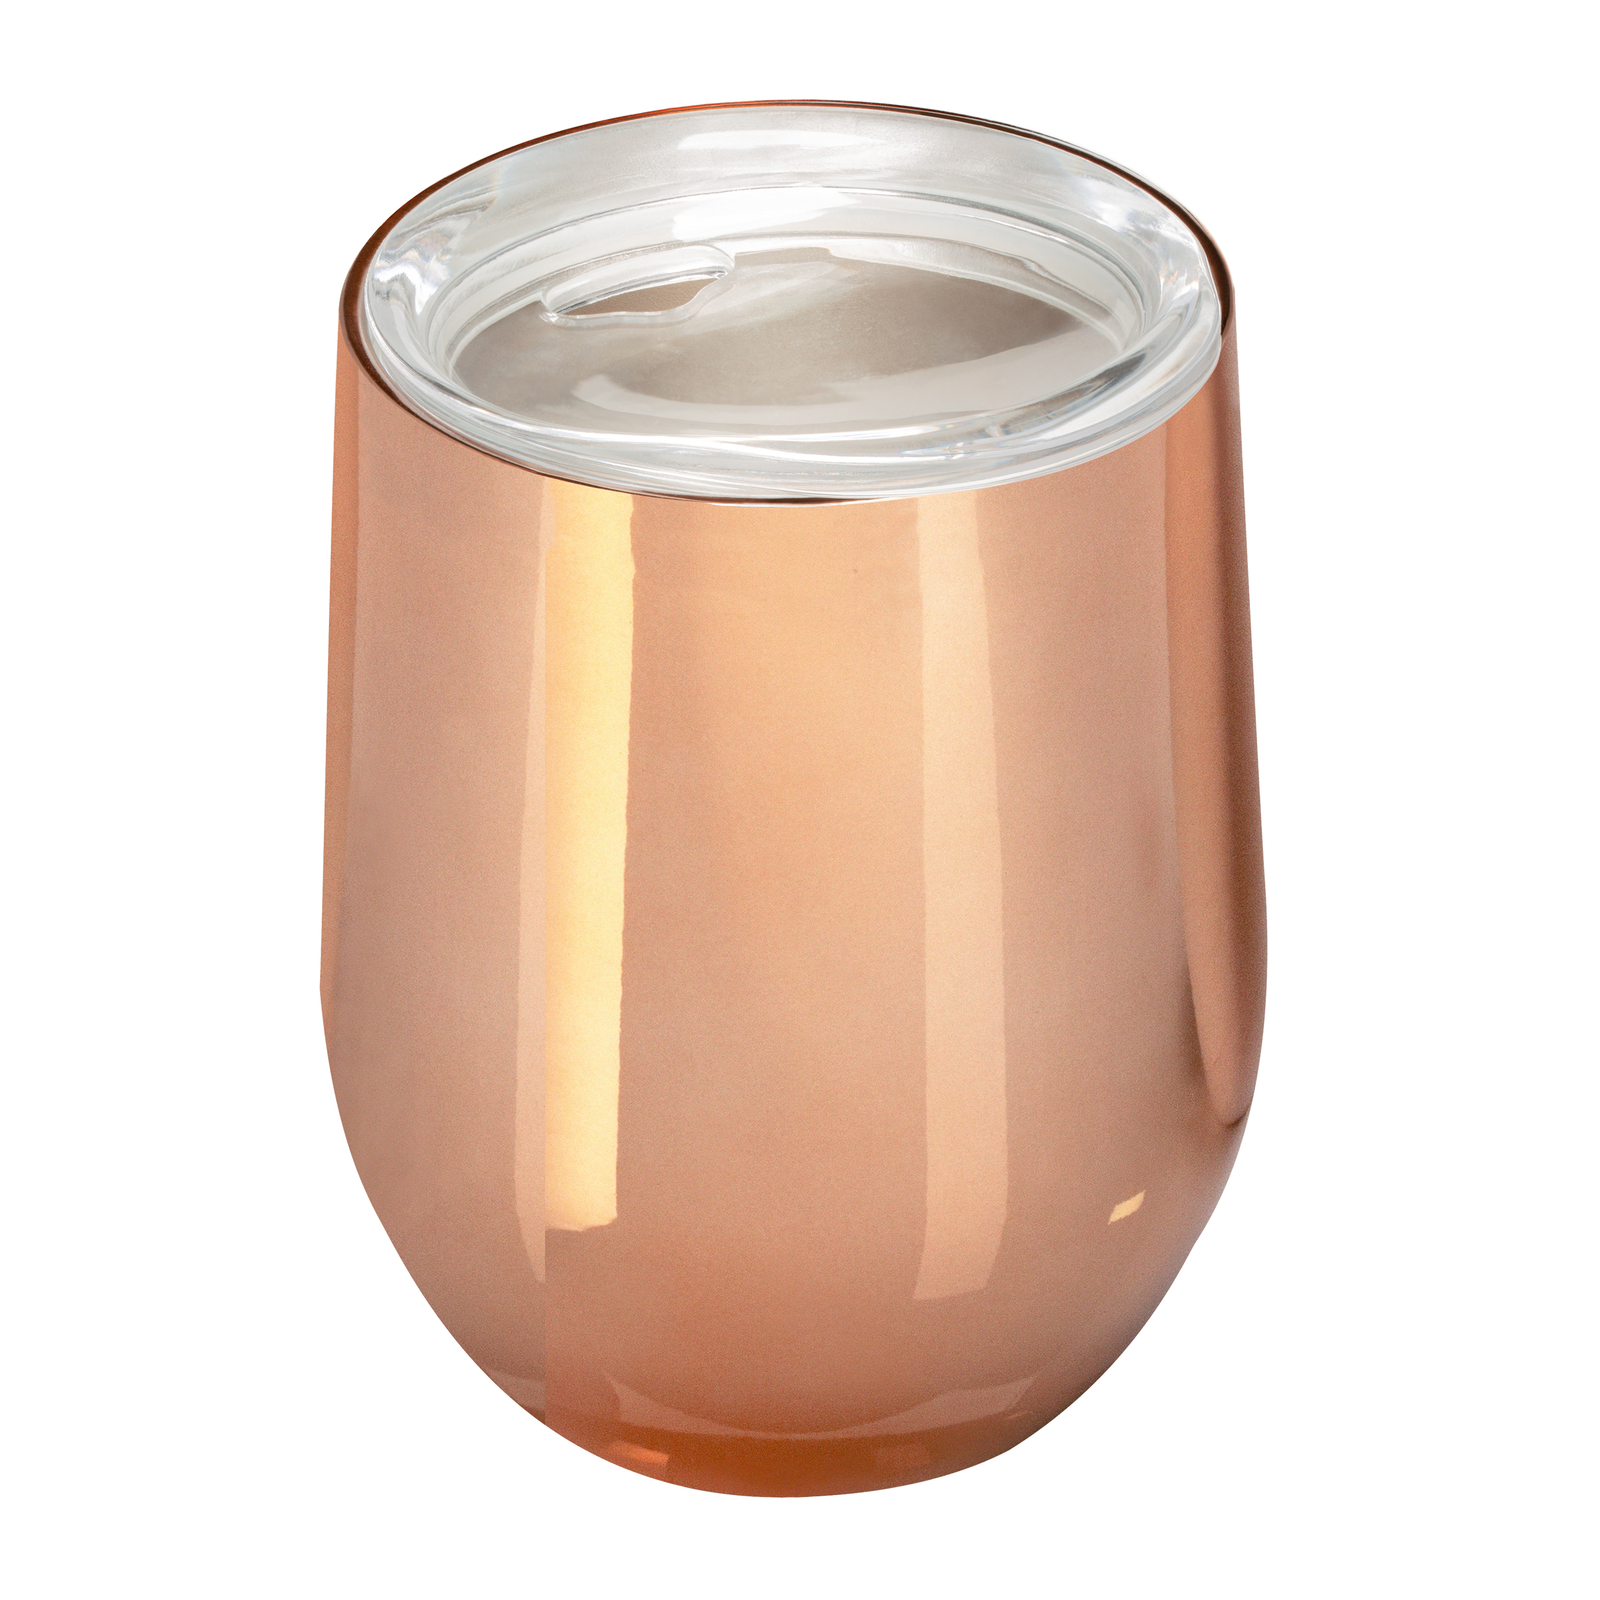 LM Becher REFLECTS-SUDBURY ROSE GOLD rosé gold